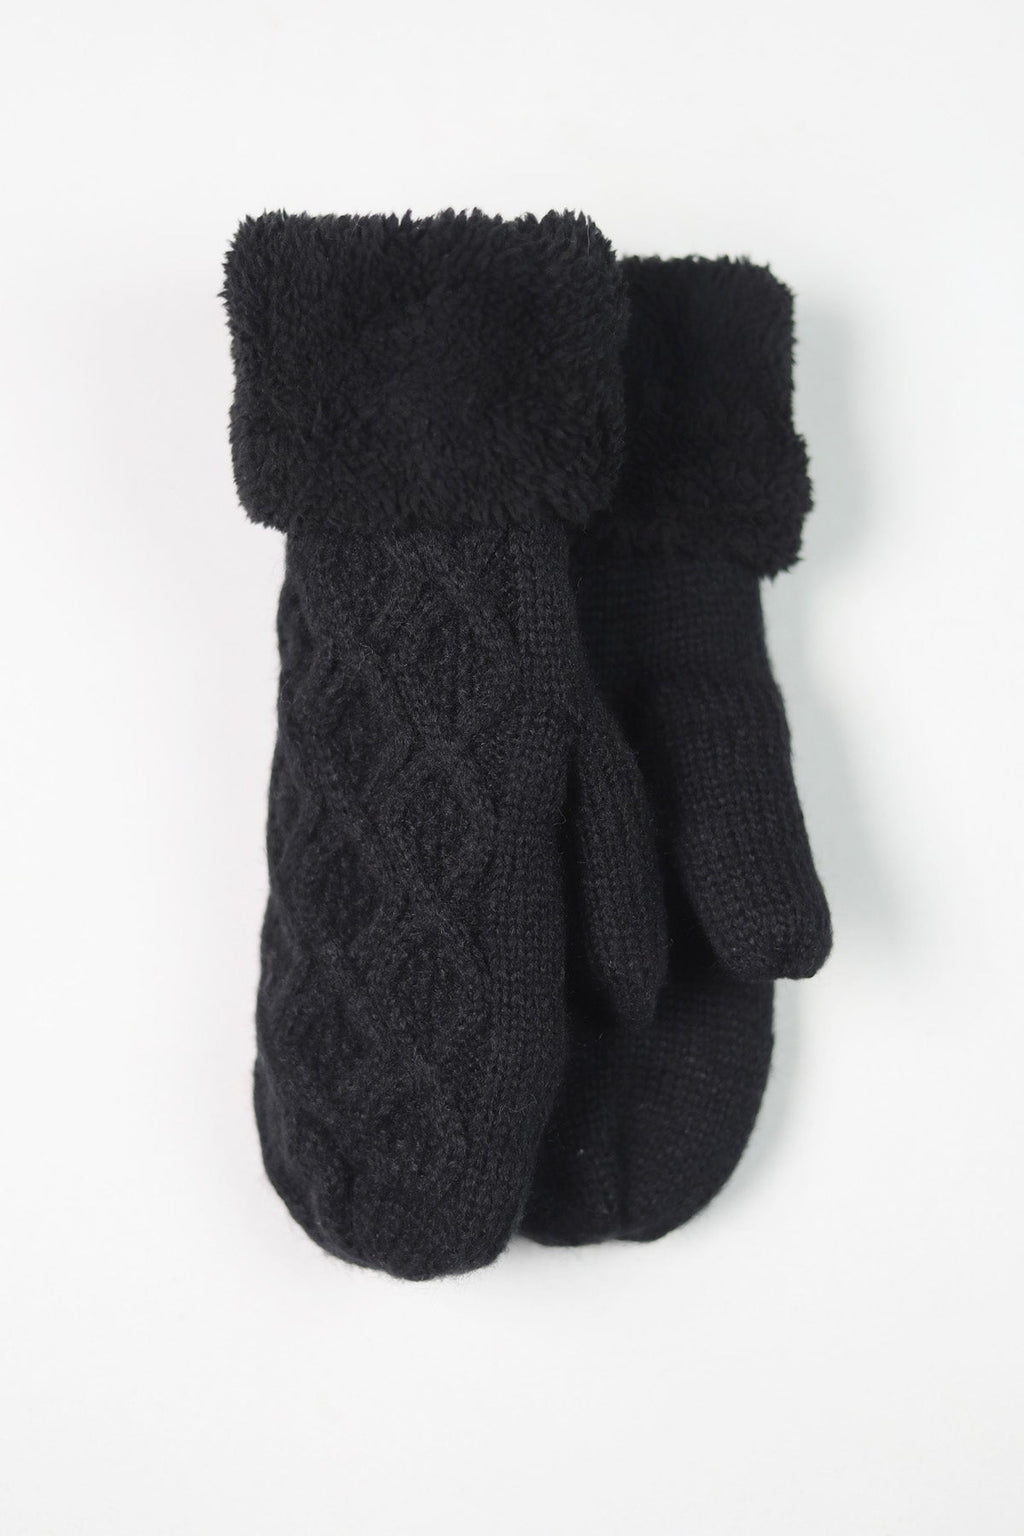 Kallee Cable Knit Mittens: Black